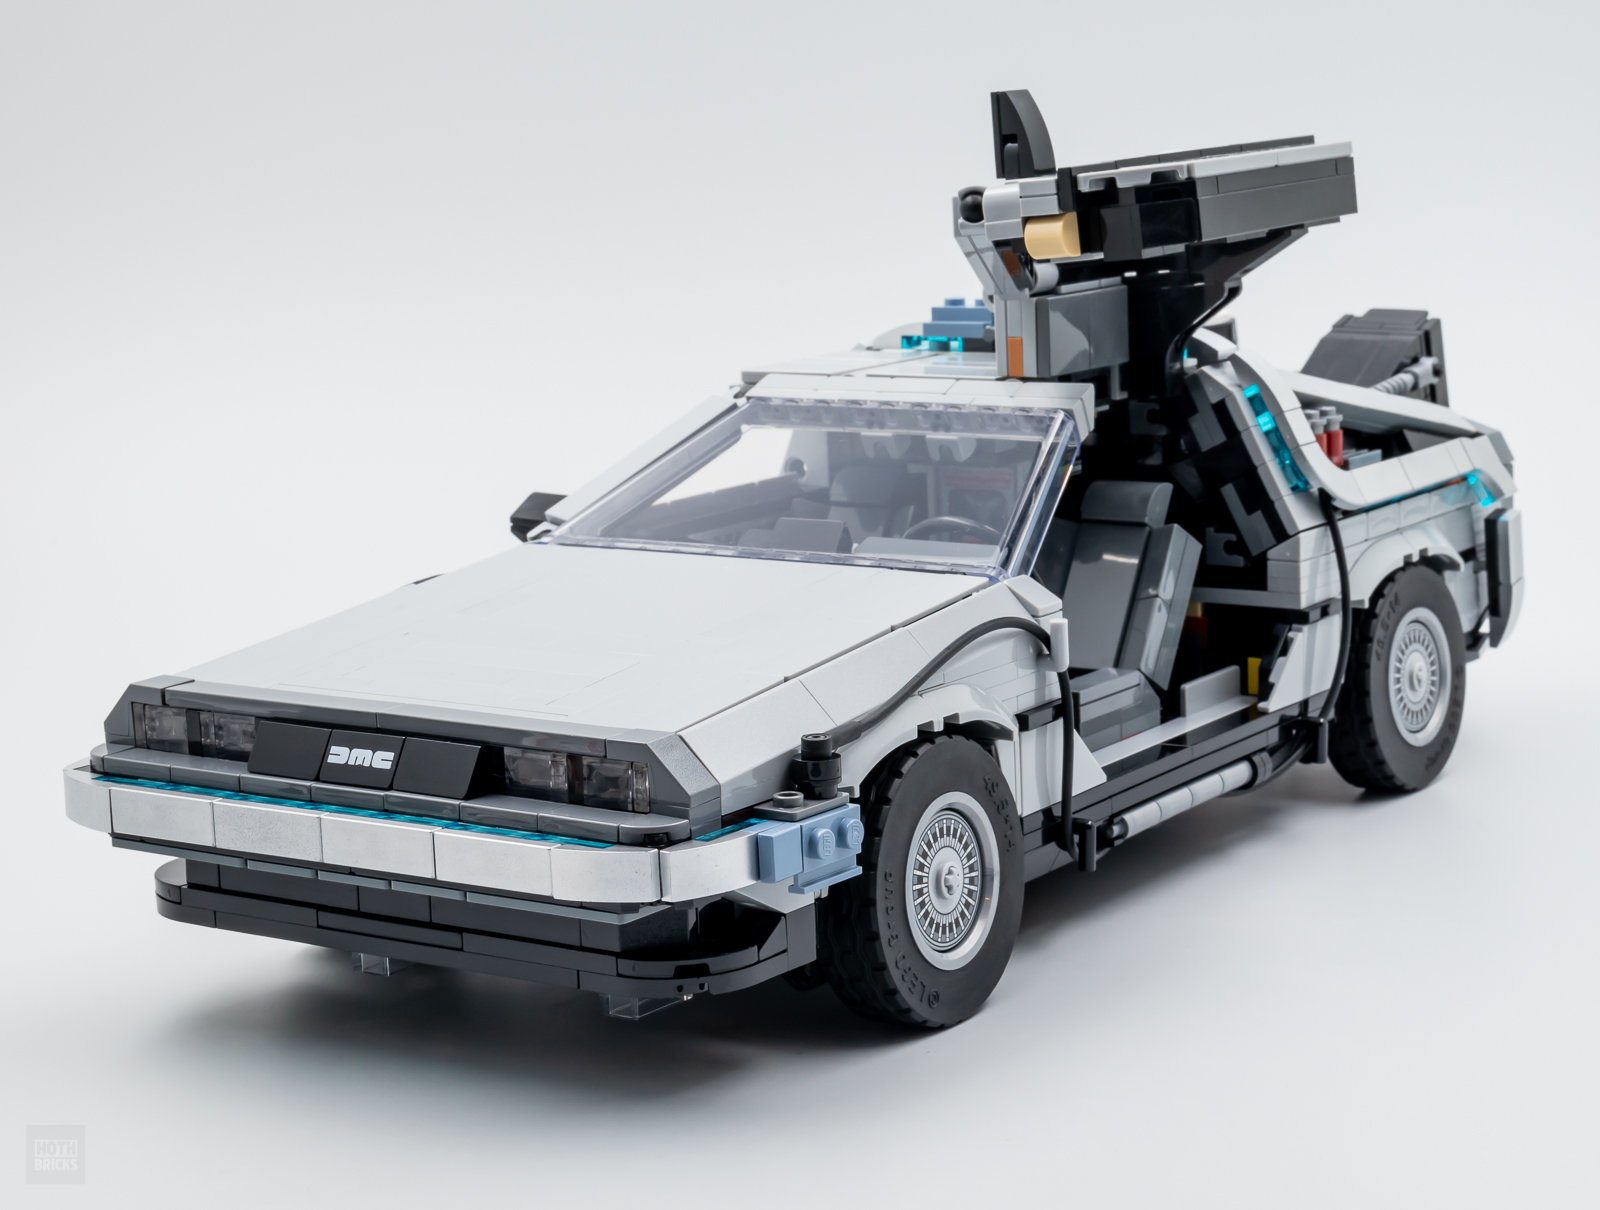 Save $40 Off the LEGO Back to The Future DeLorean Time Machine - IGN